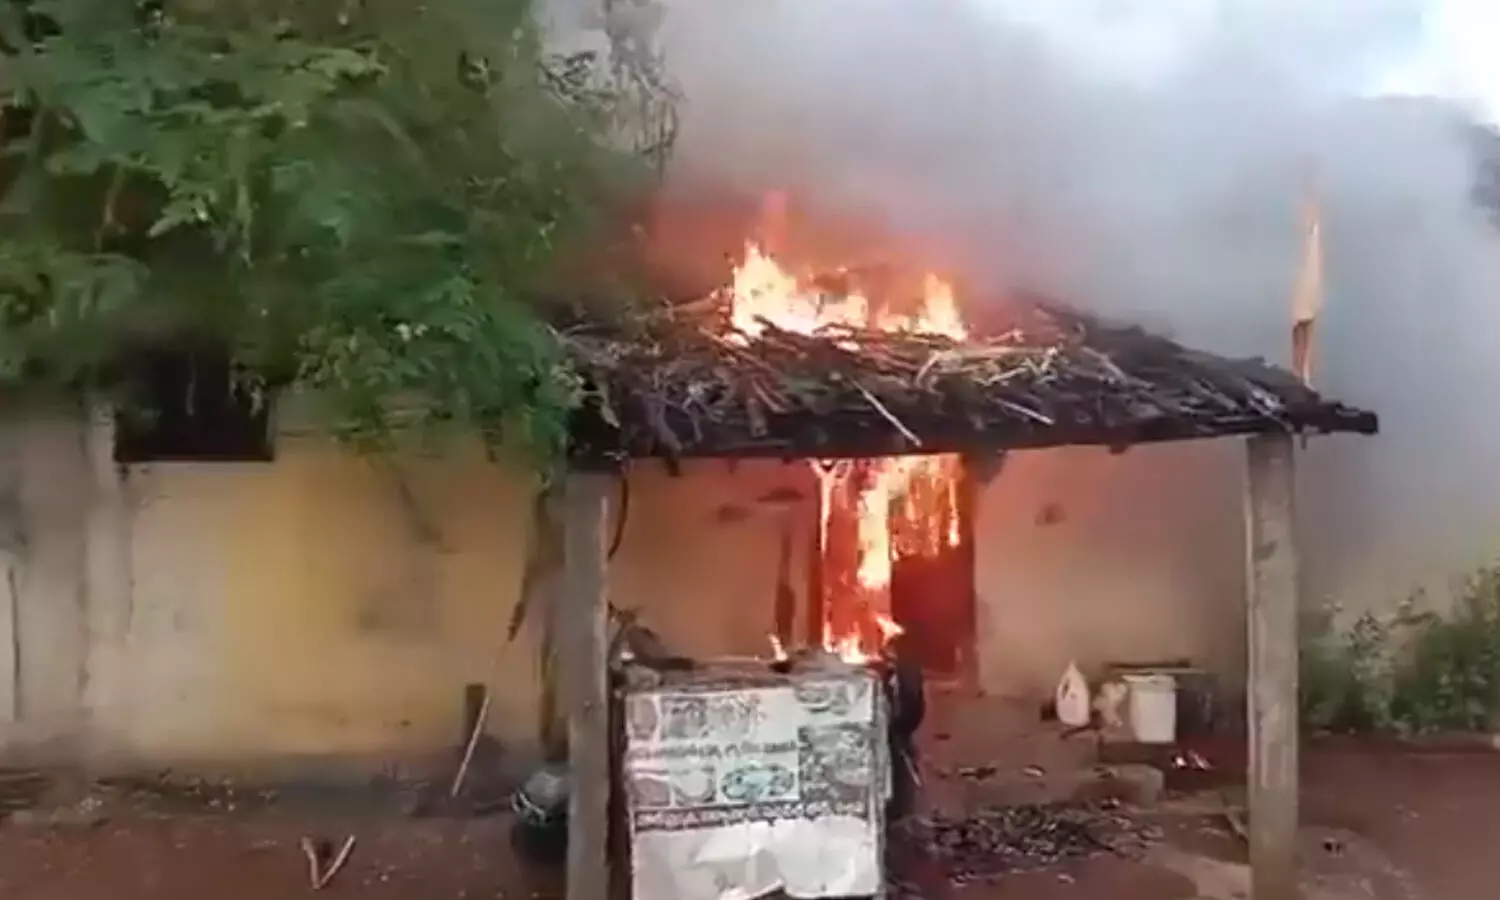 Man sets ablaze house in domestic dispute